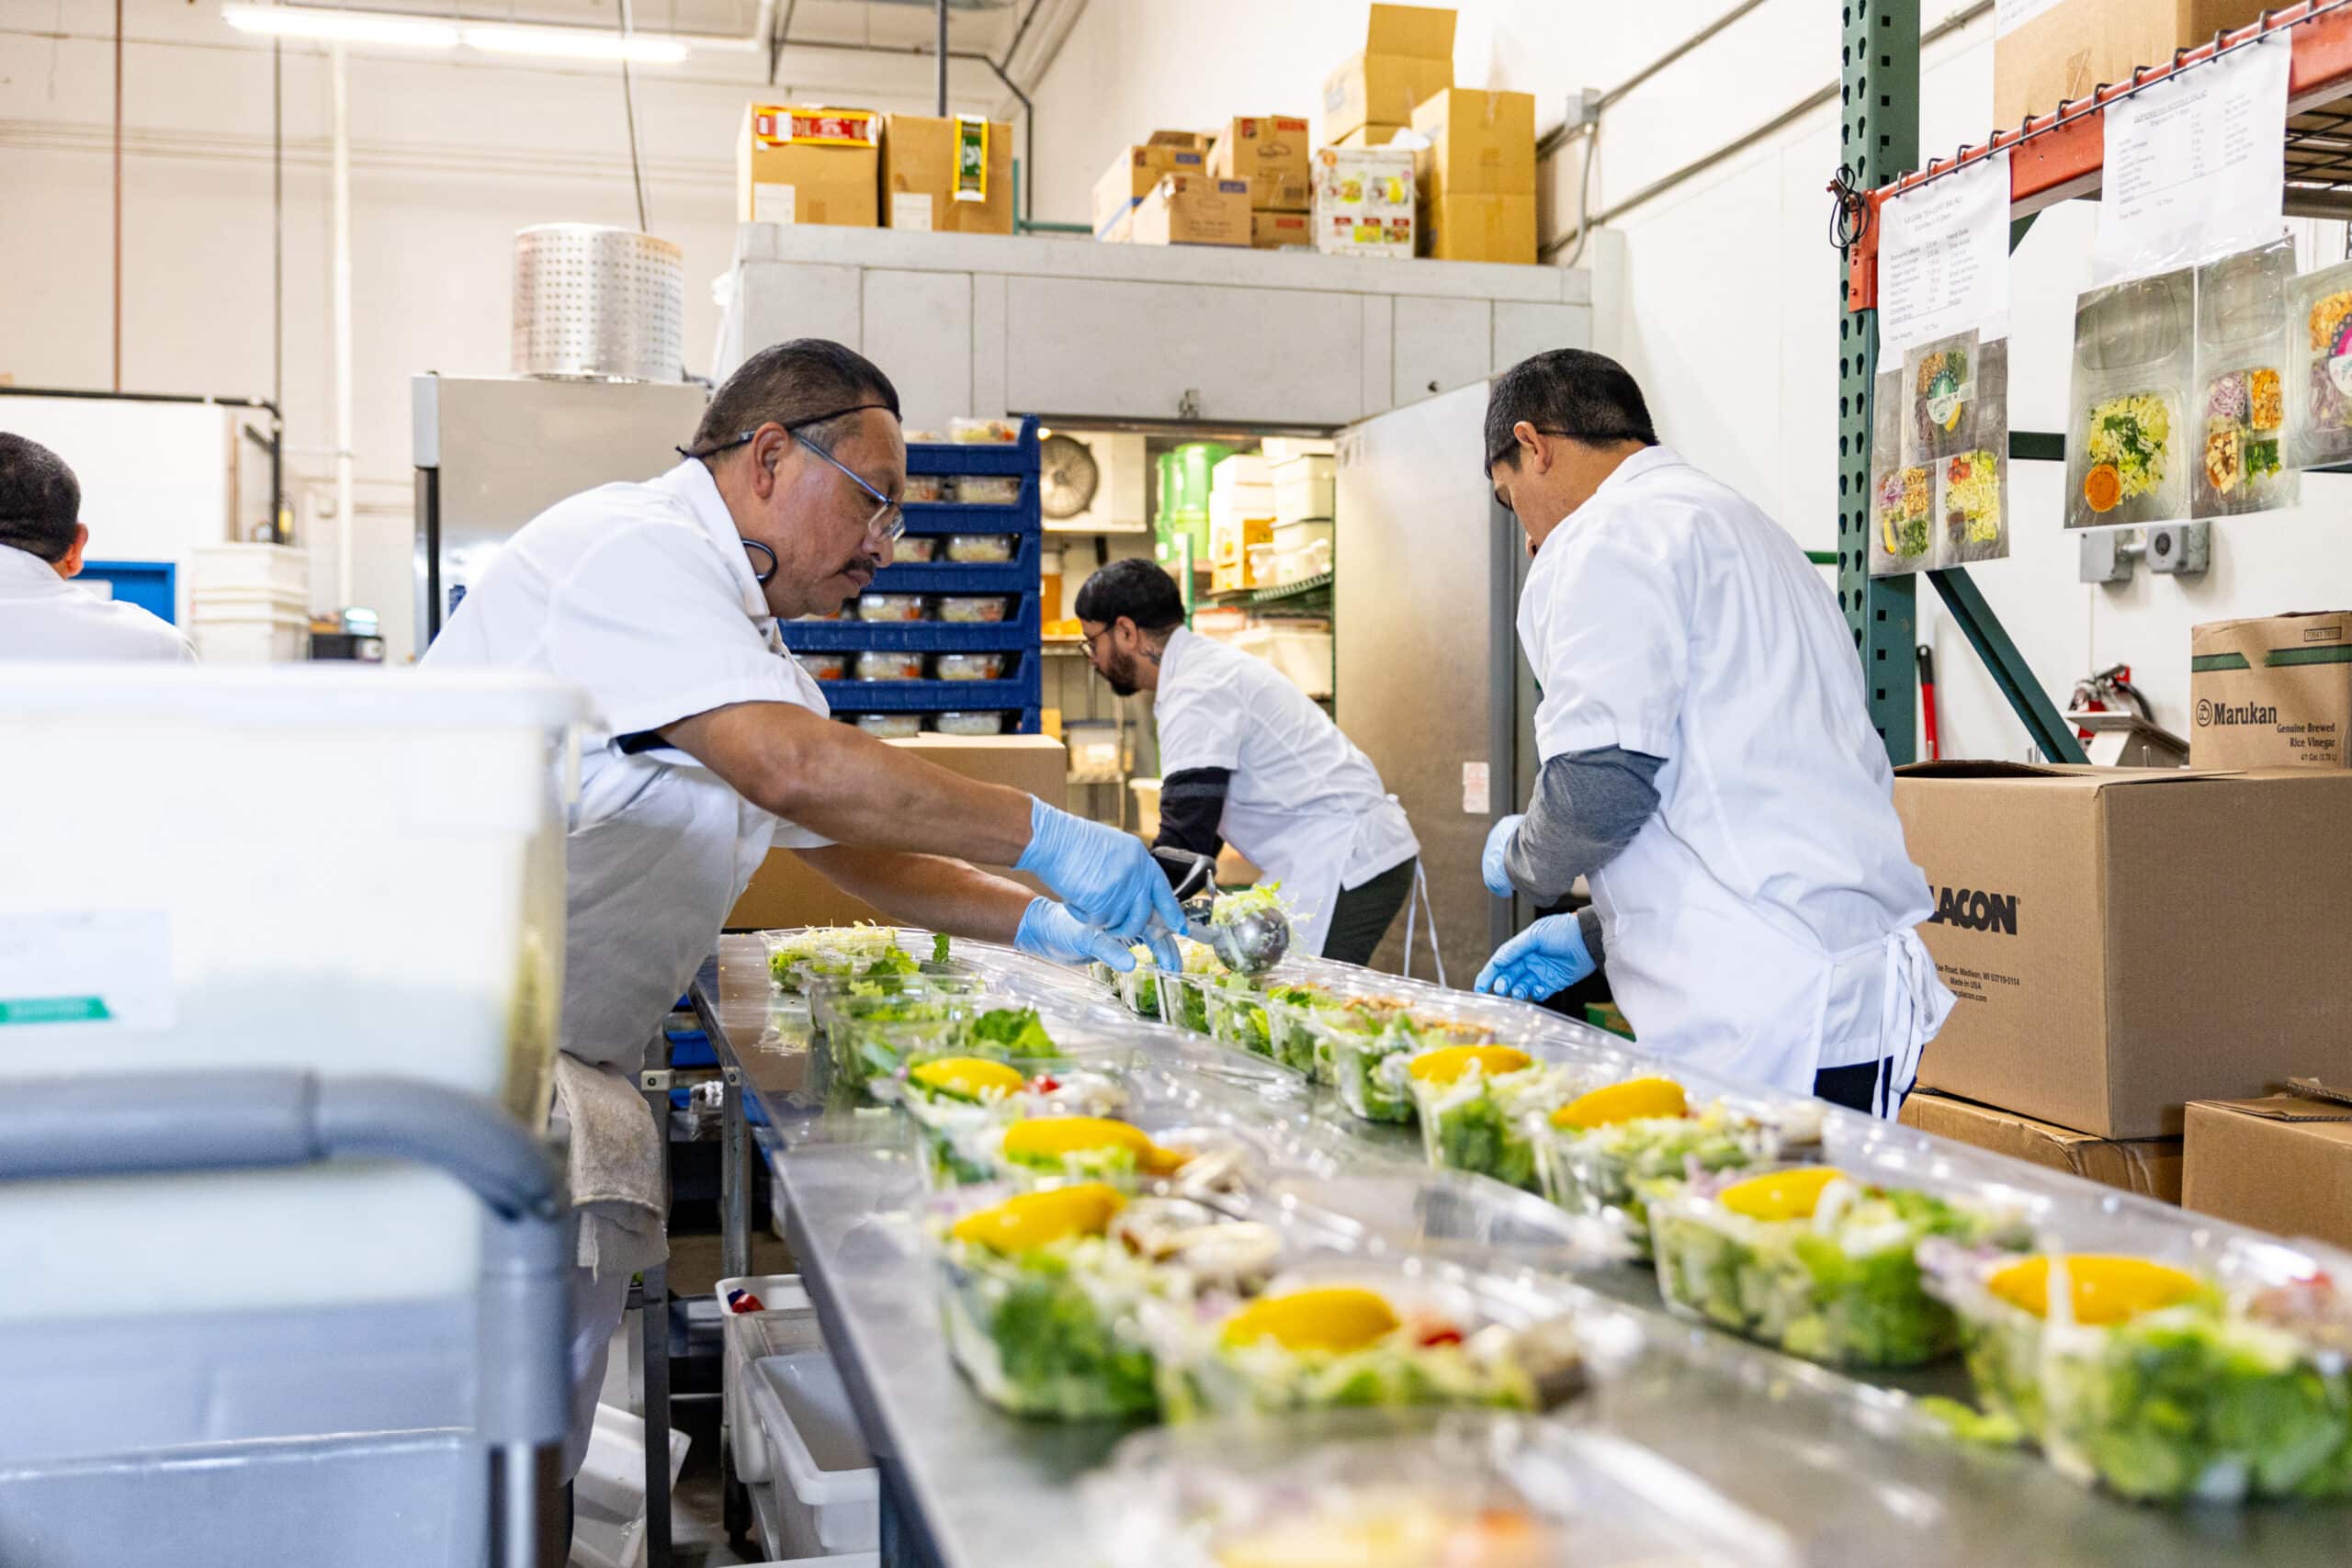 Rows of salads being packaged by factory employees